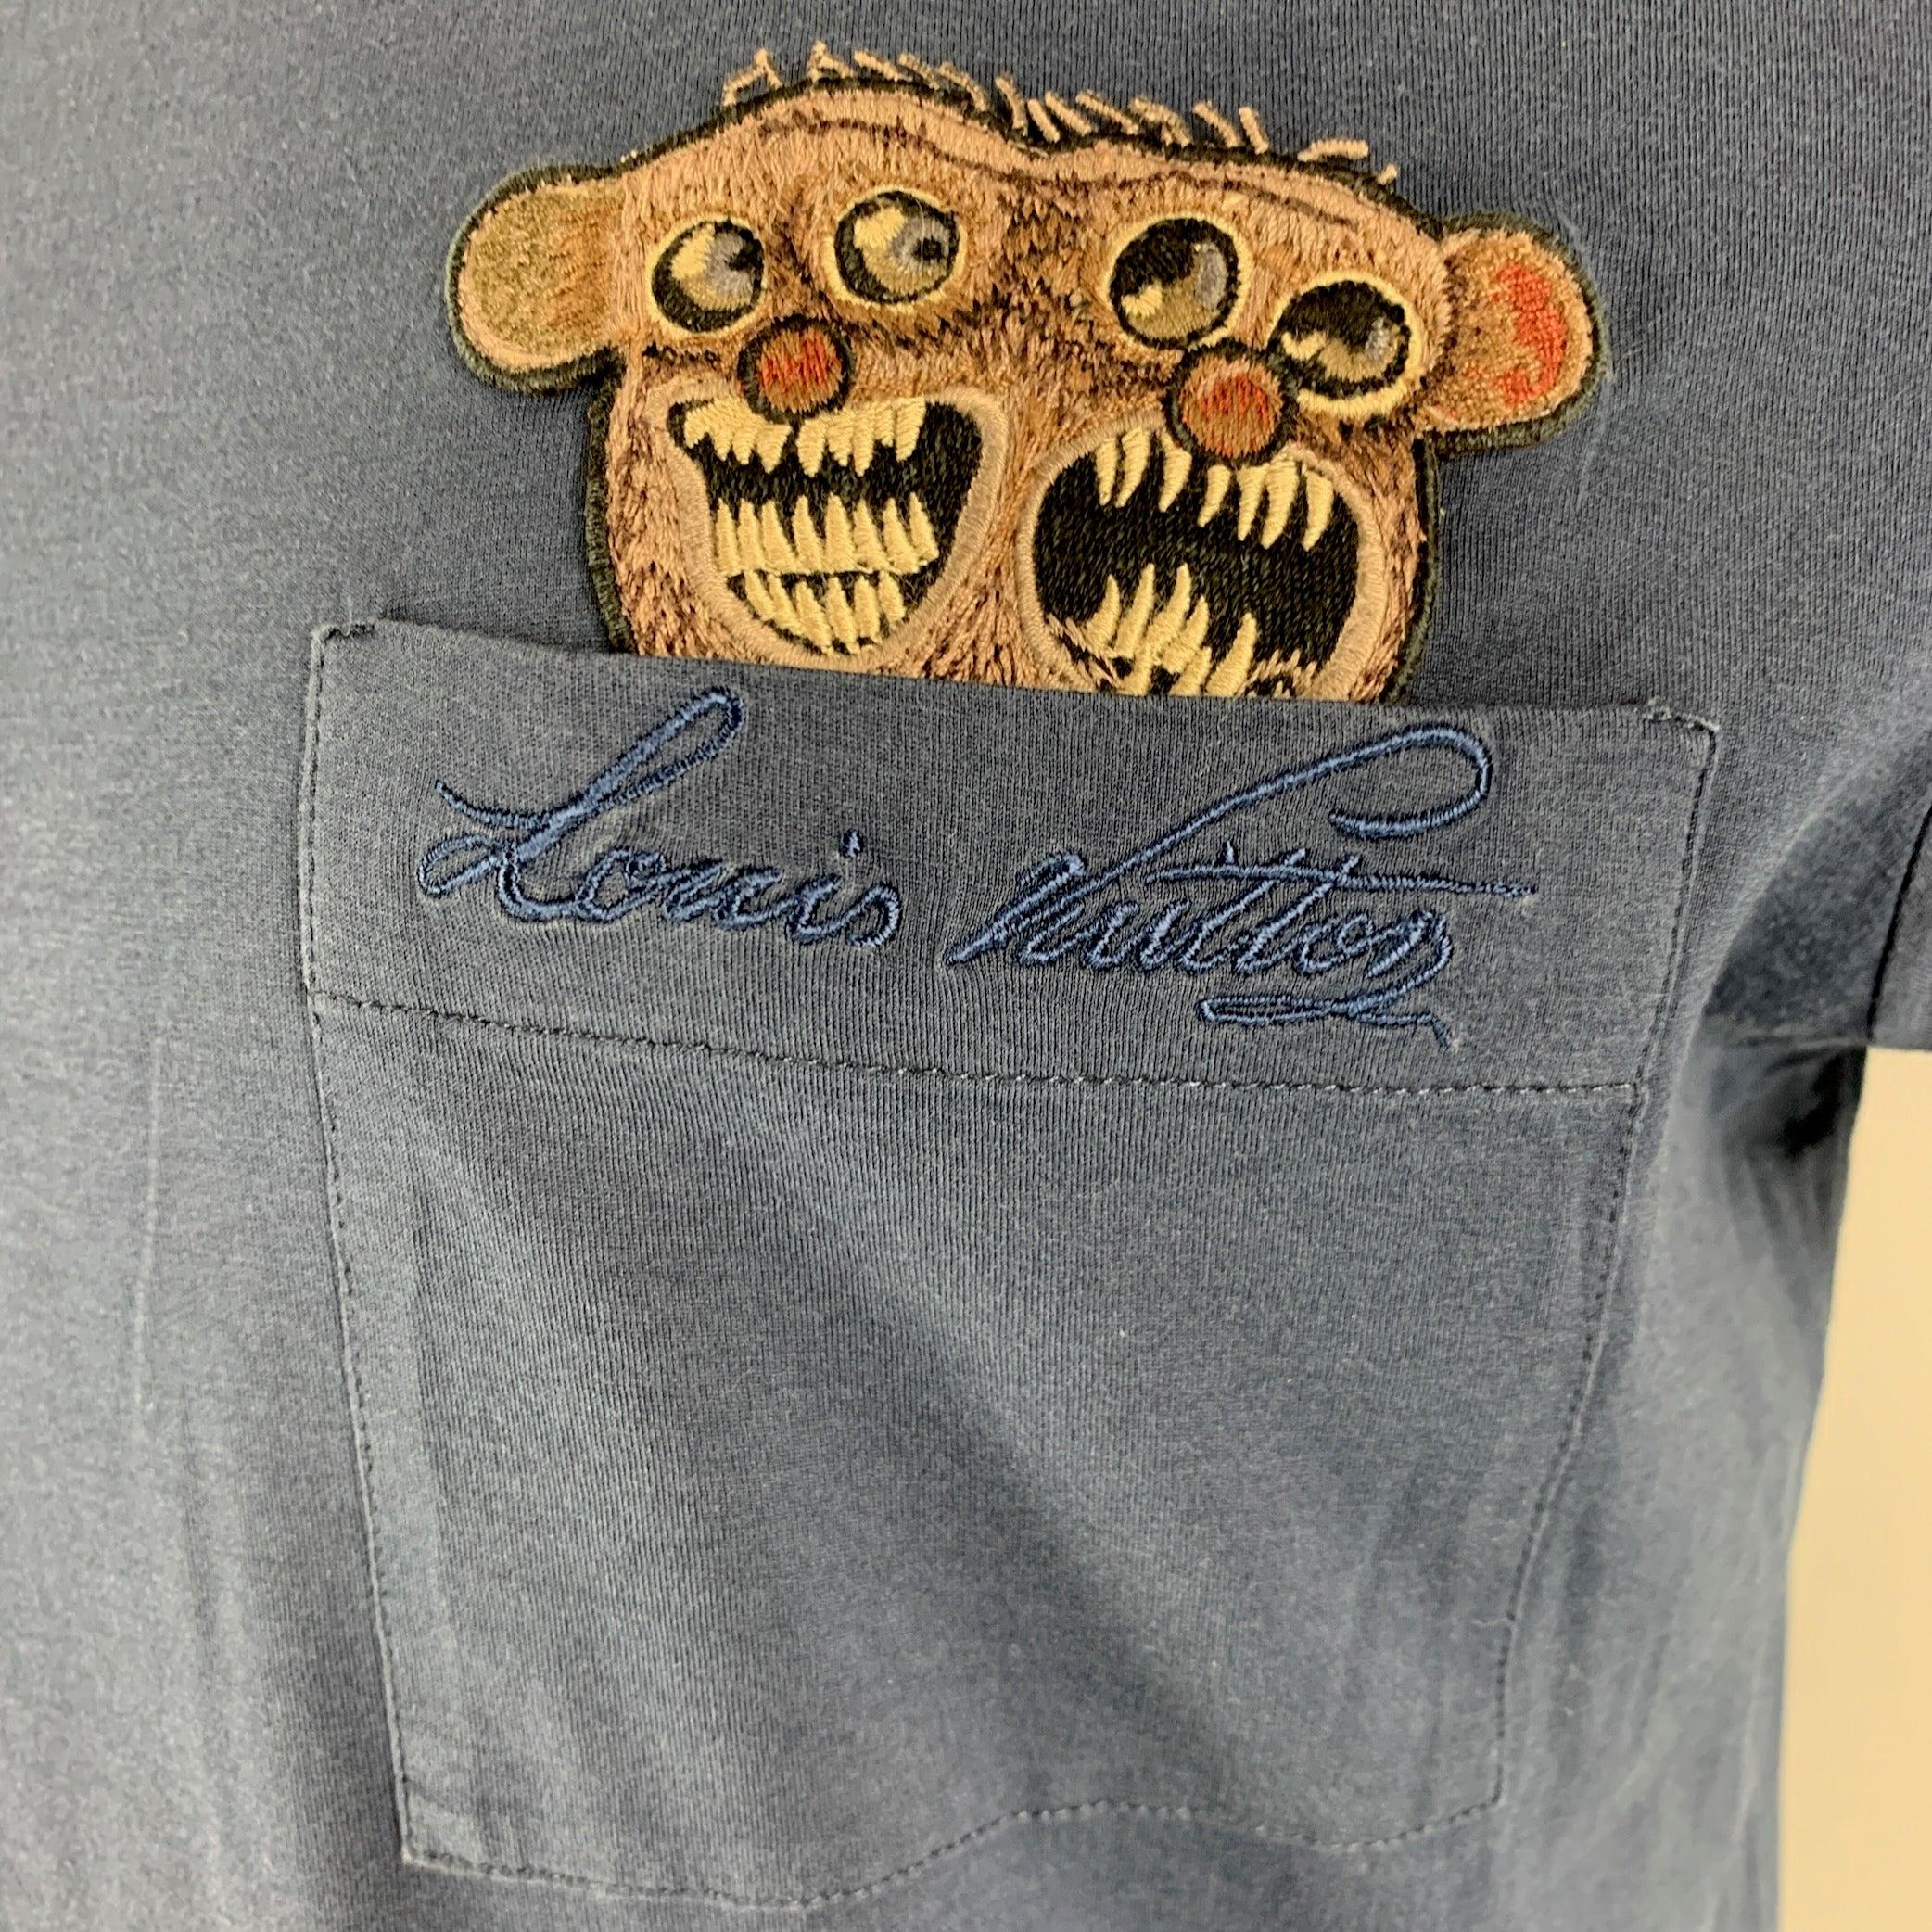 LOUIS VUITTON t-shirt comes in a blue cotton jersey knit featuring crew- neck, front pockets and monster patch applique. Made in Italy.Very Good Pre-Owned Condition. Moderate Color Fading. 

Marked:   M 

Measurements: 
 
Shoulder: 20 inches Chest: